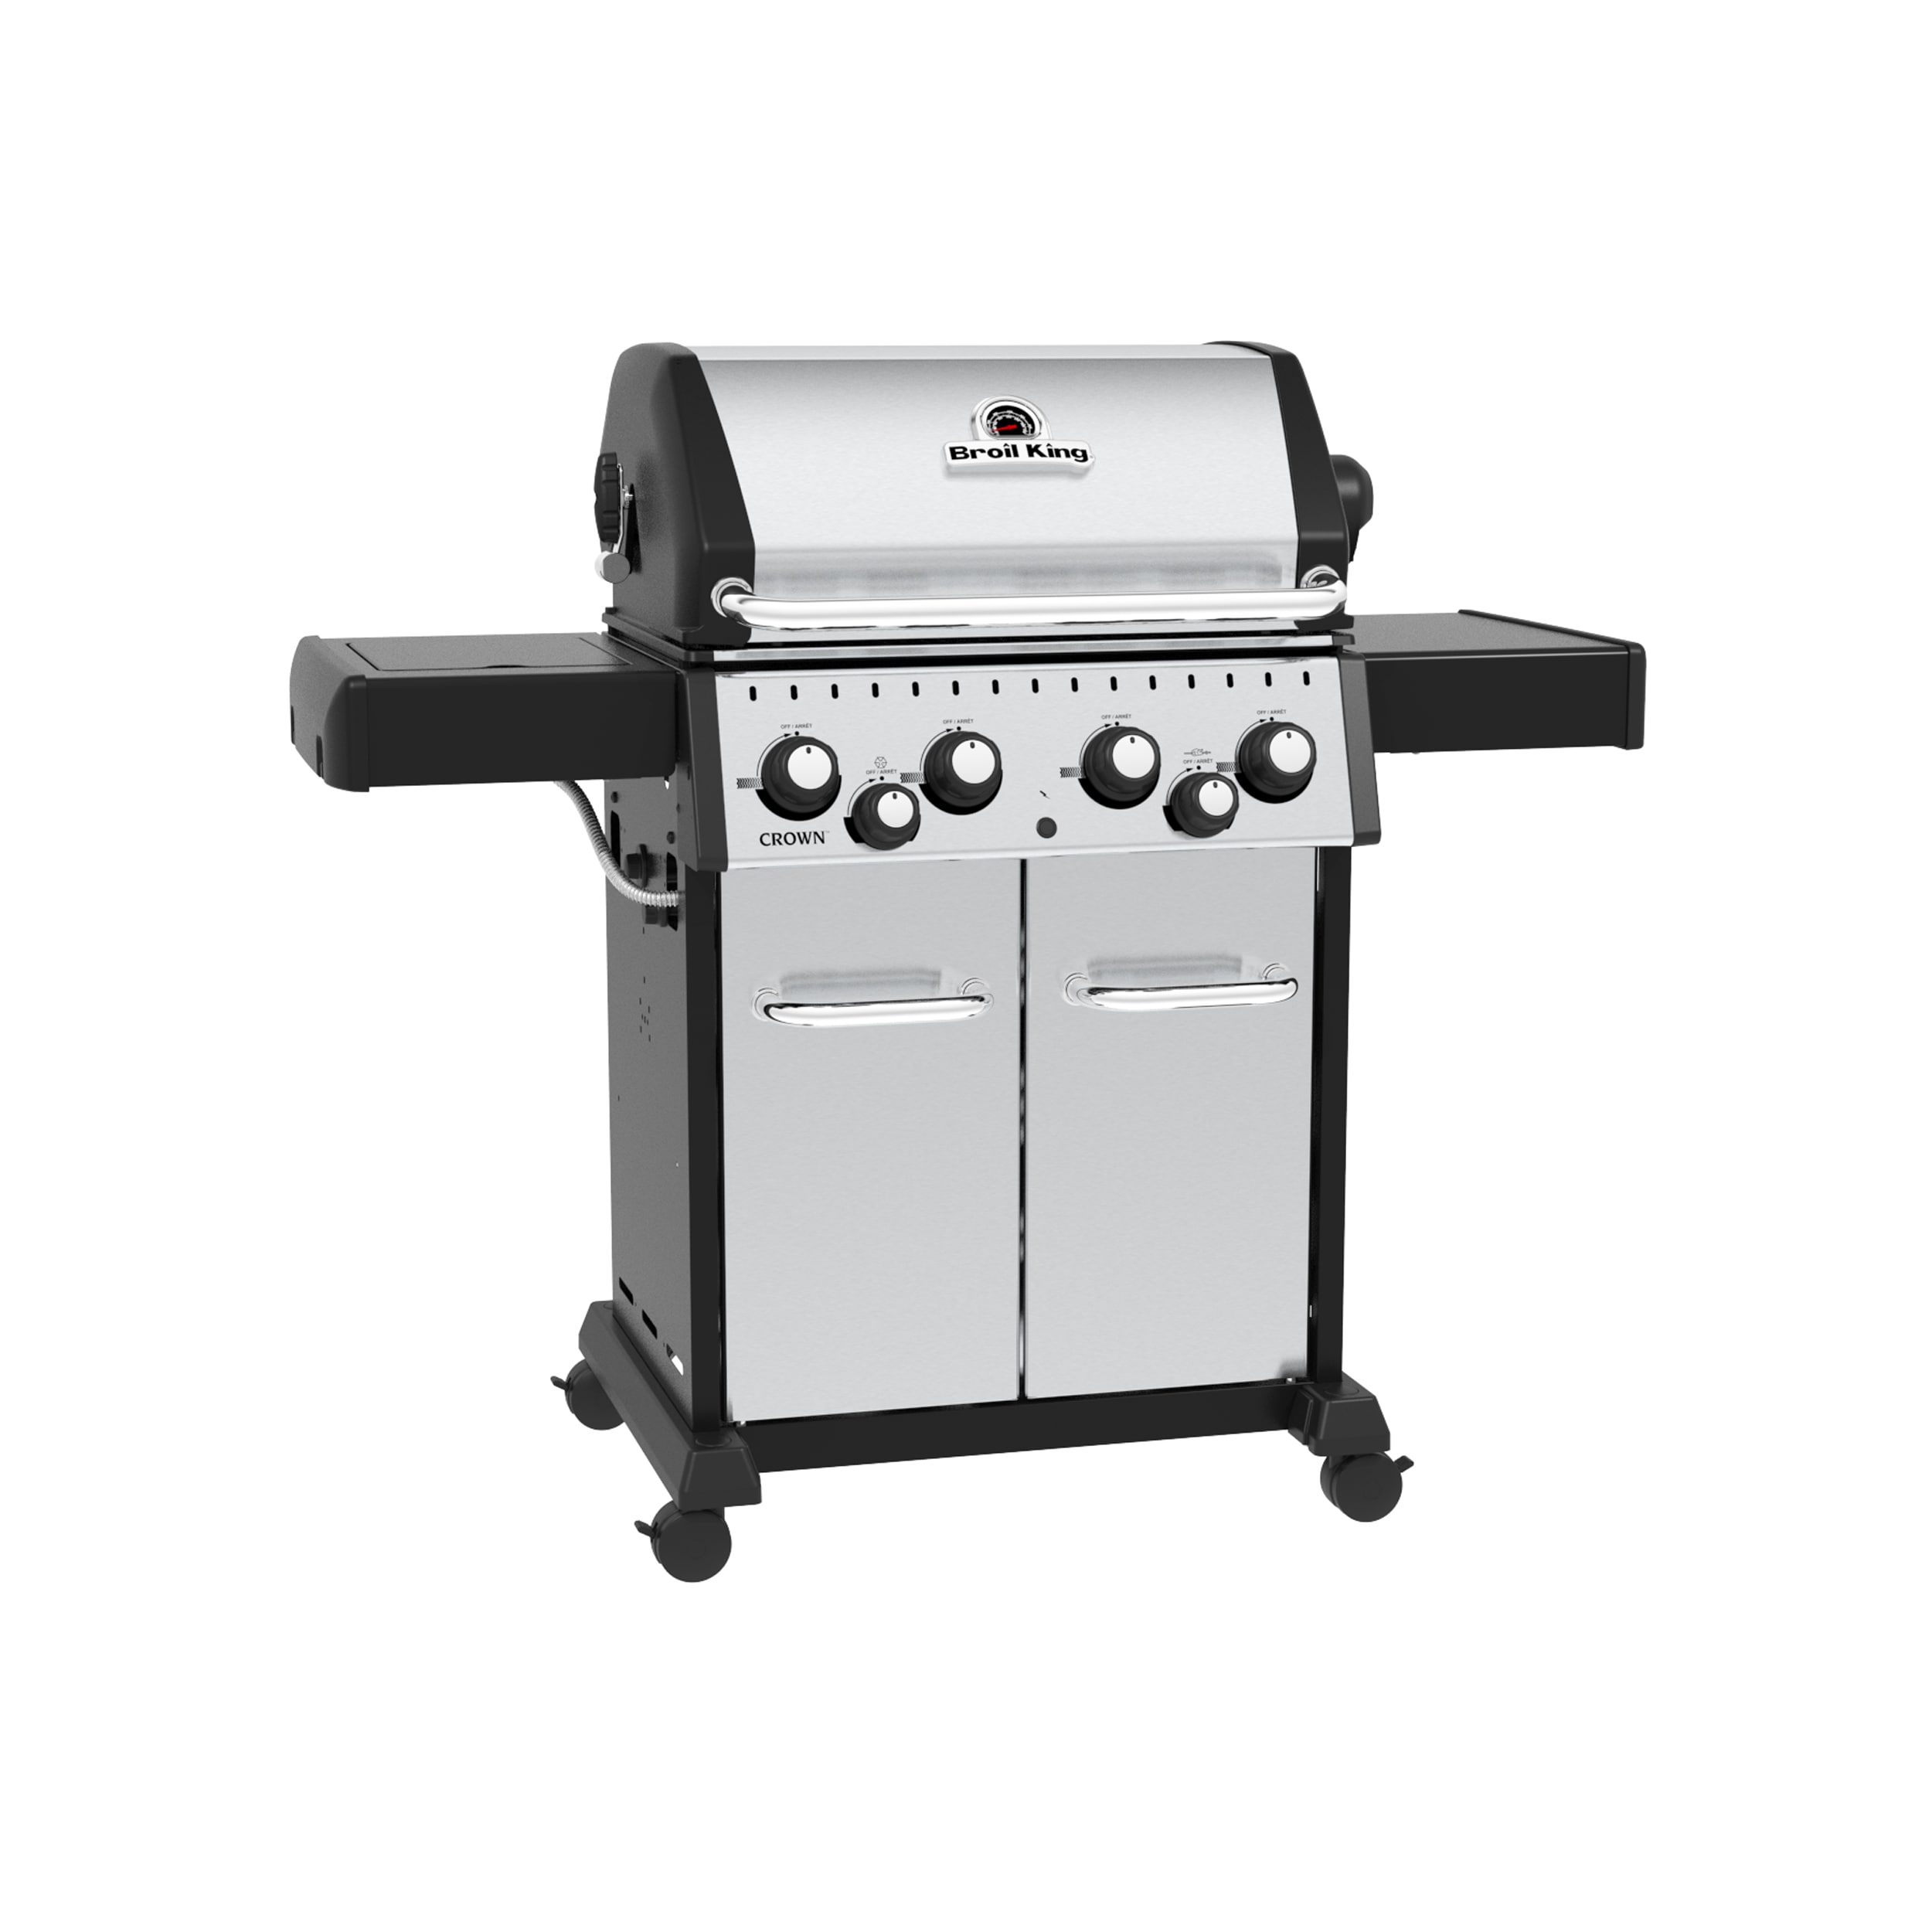 Broil King Crown S 490 Stainless Steel 4-Burner Liquid Propane Gas Grill with 1 Side with Rotisserie Burner the Gas Grills department at Lowes.com